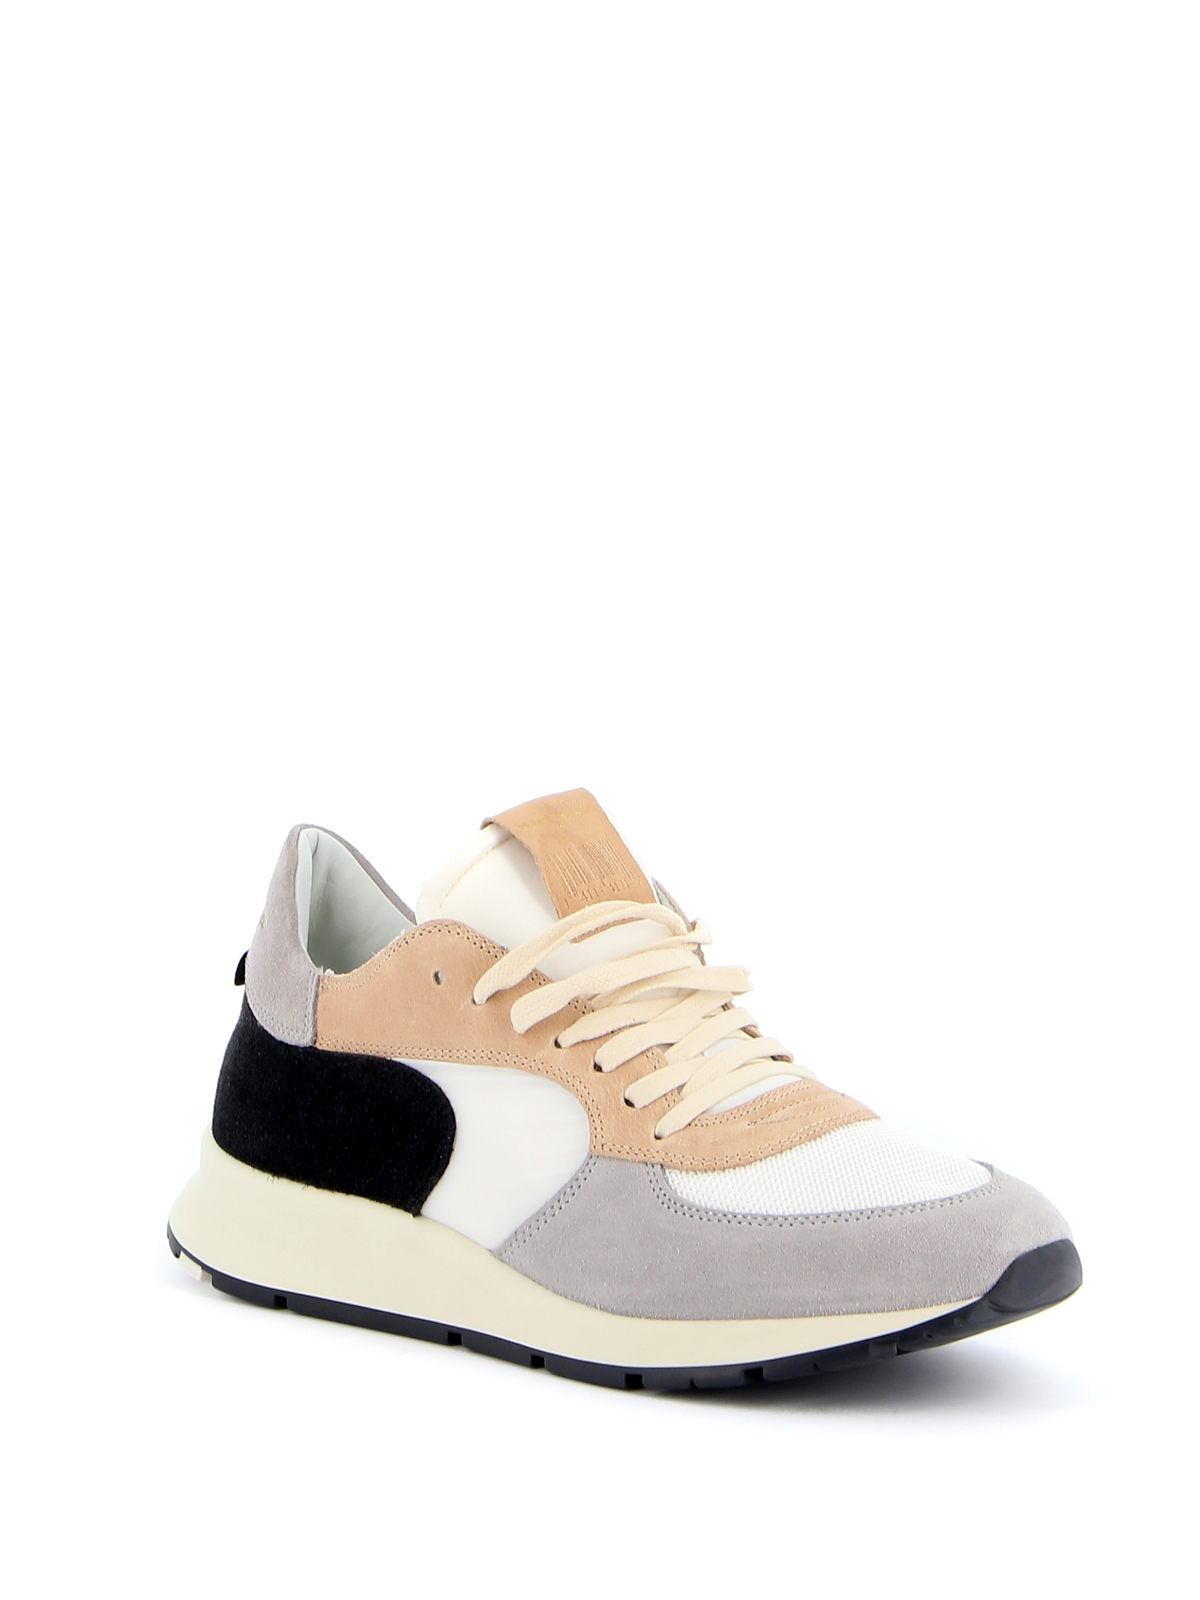 Trainers Philippe Model - Montecarlo suede and leather sneakers - NTLUXC15